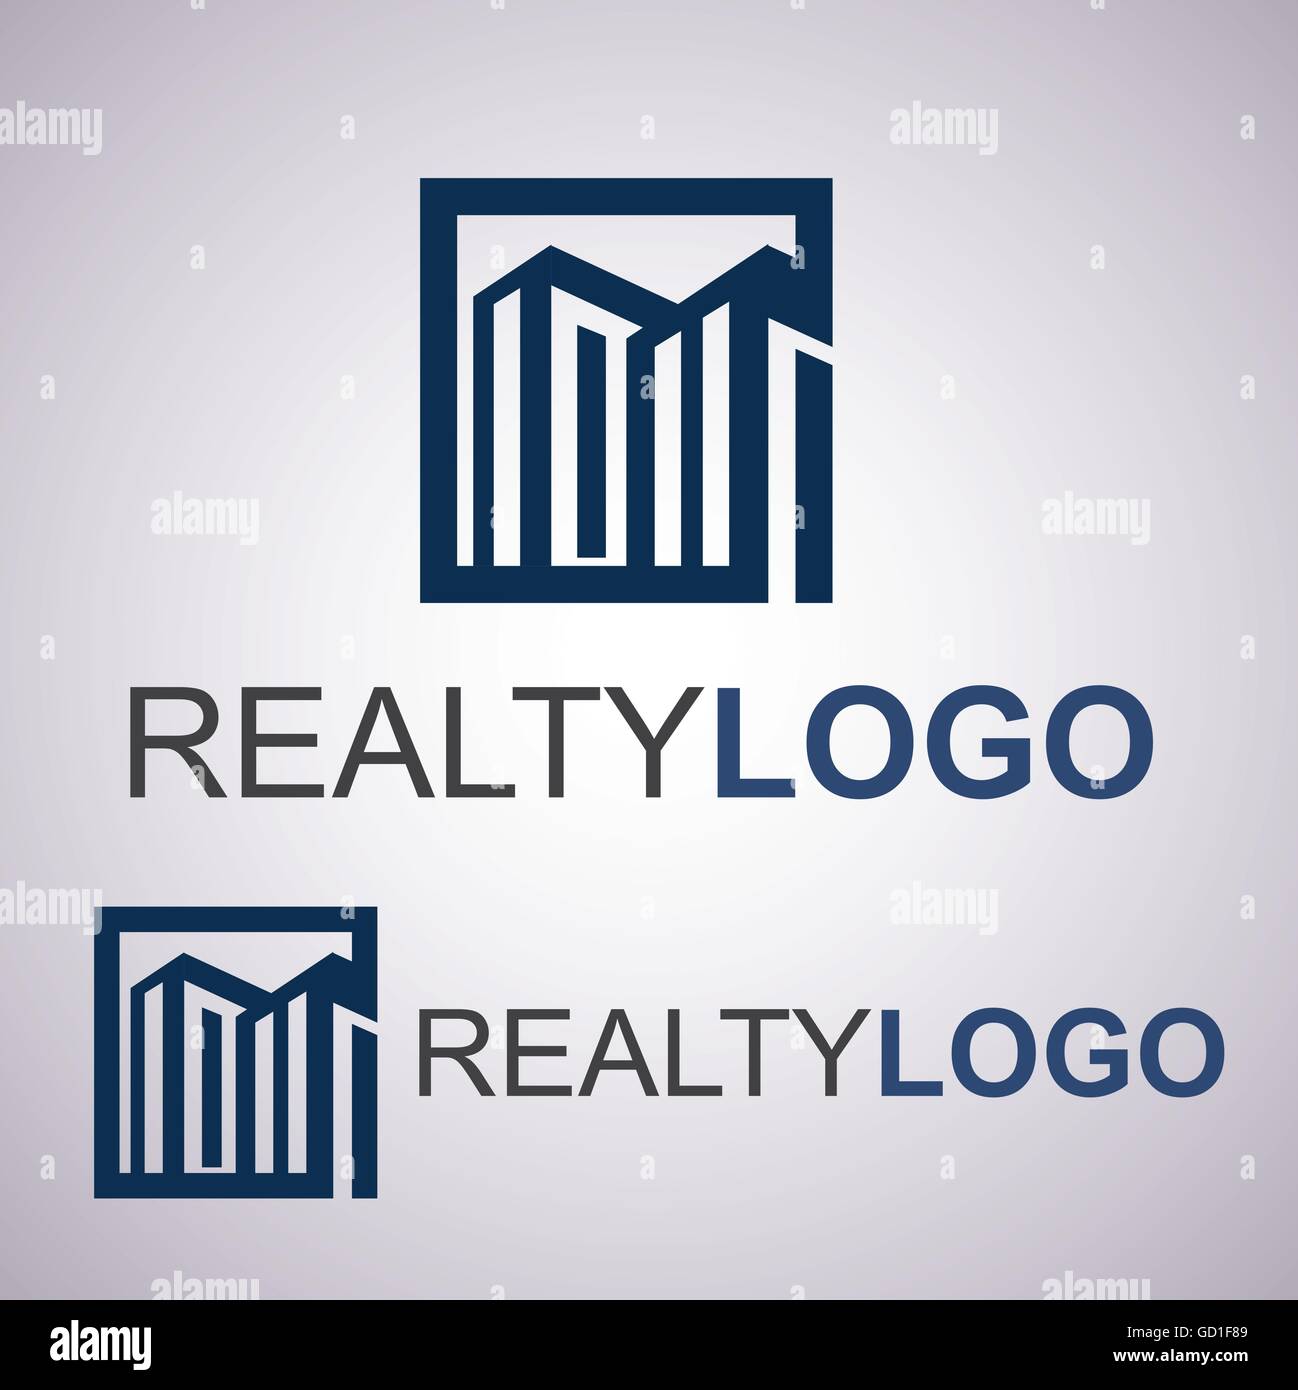 realty logo designed in a simple way so it can be use for multiple proposes like logo ,mark ,symbol or icon. Stock Vector